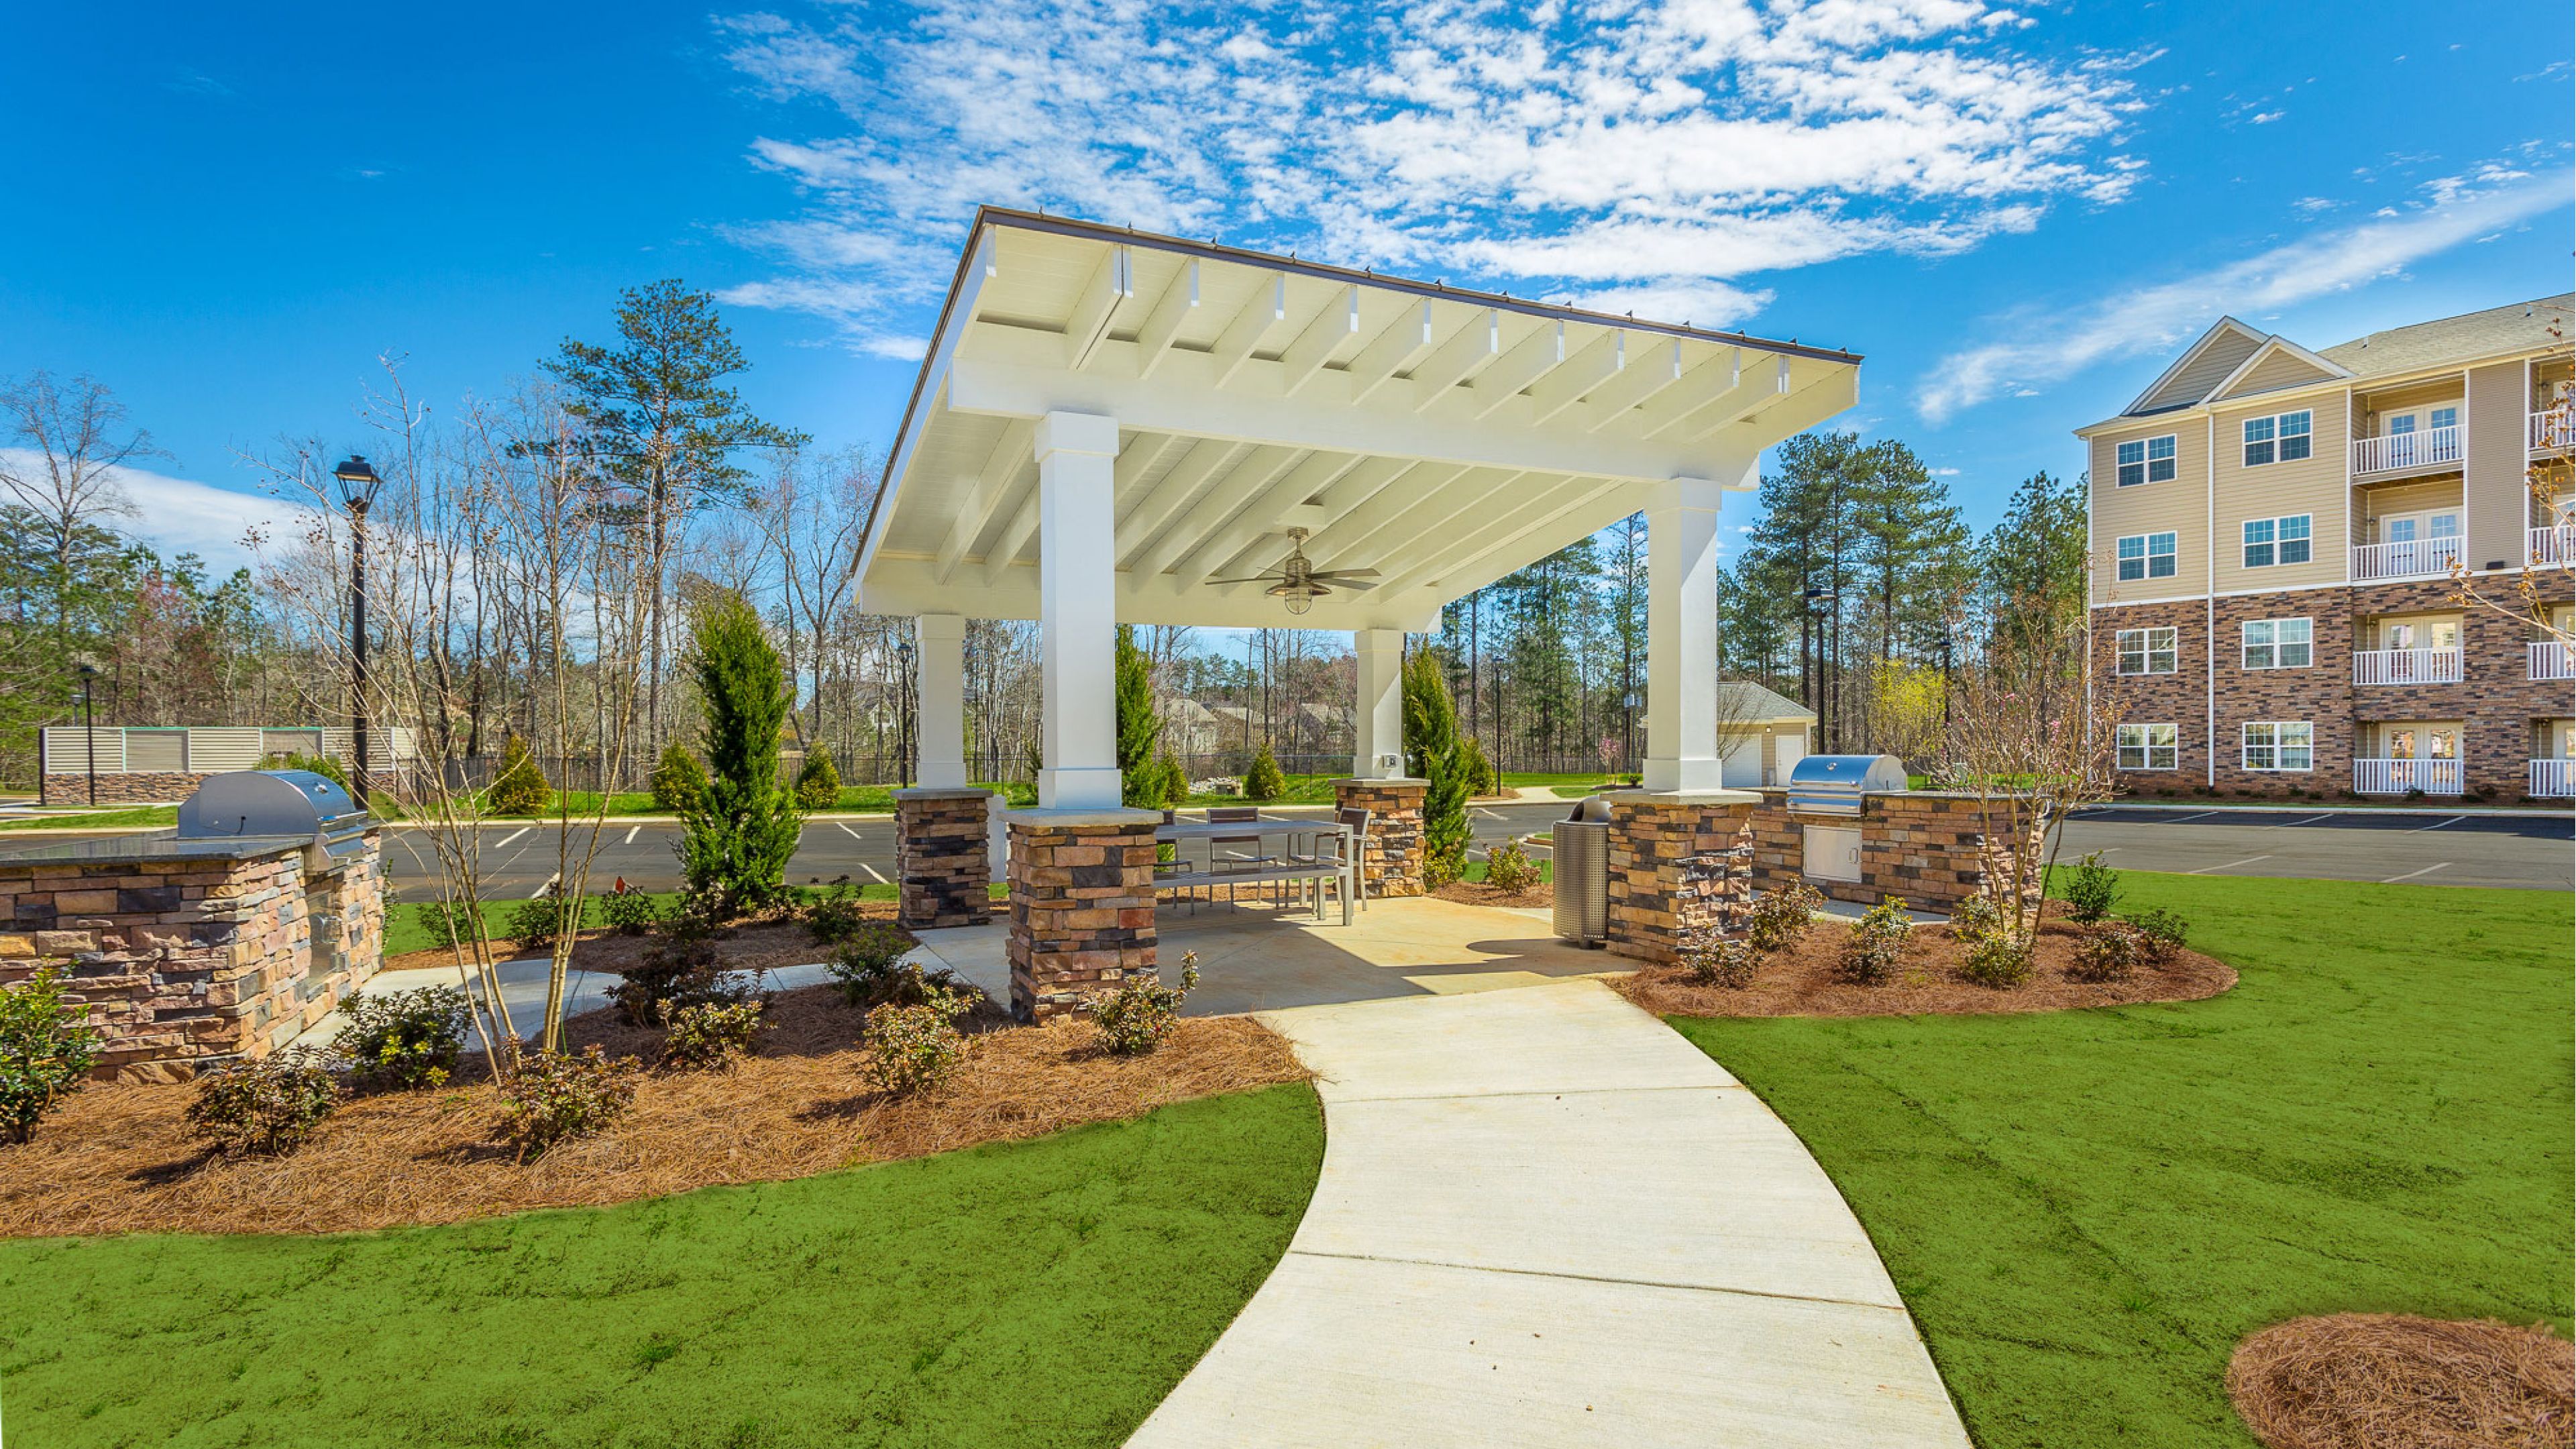 Hawthorne at Mirror Lake apartments community exterior with large green lawn and outdoor picnic and BBQ area